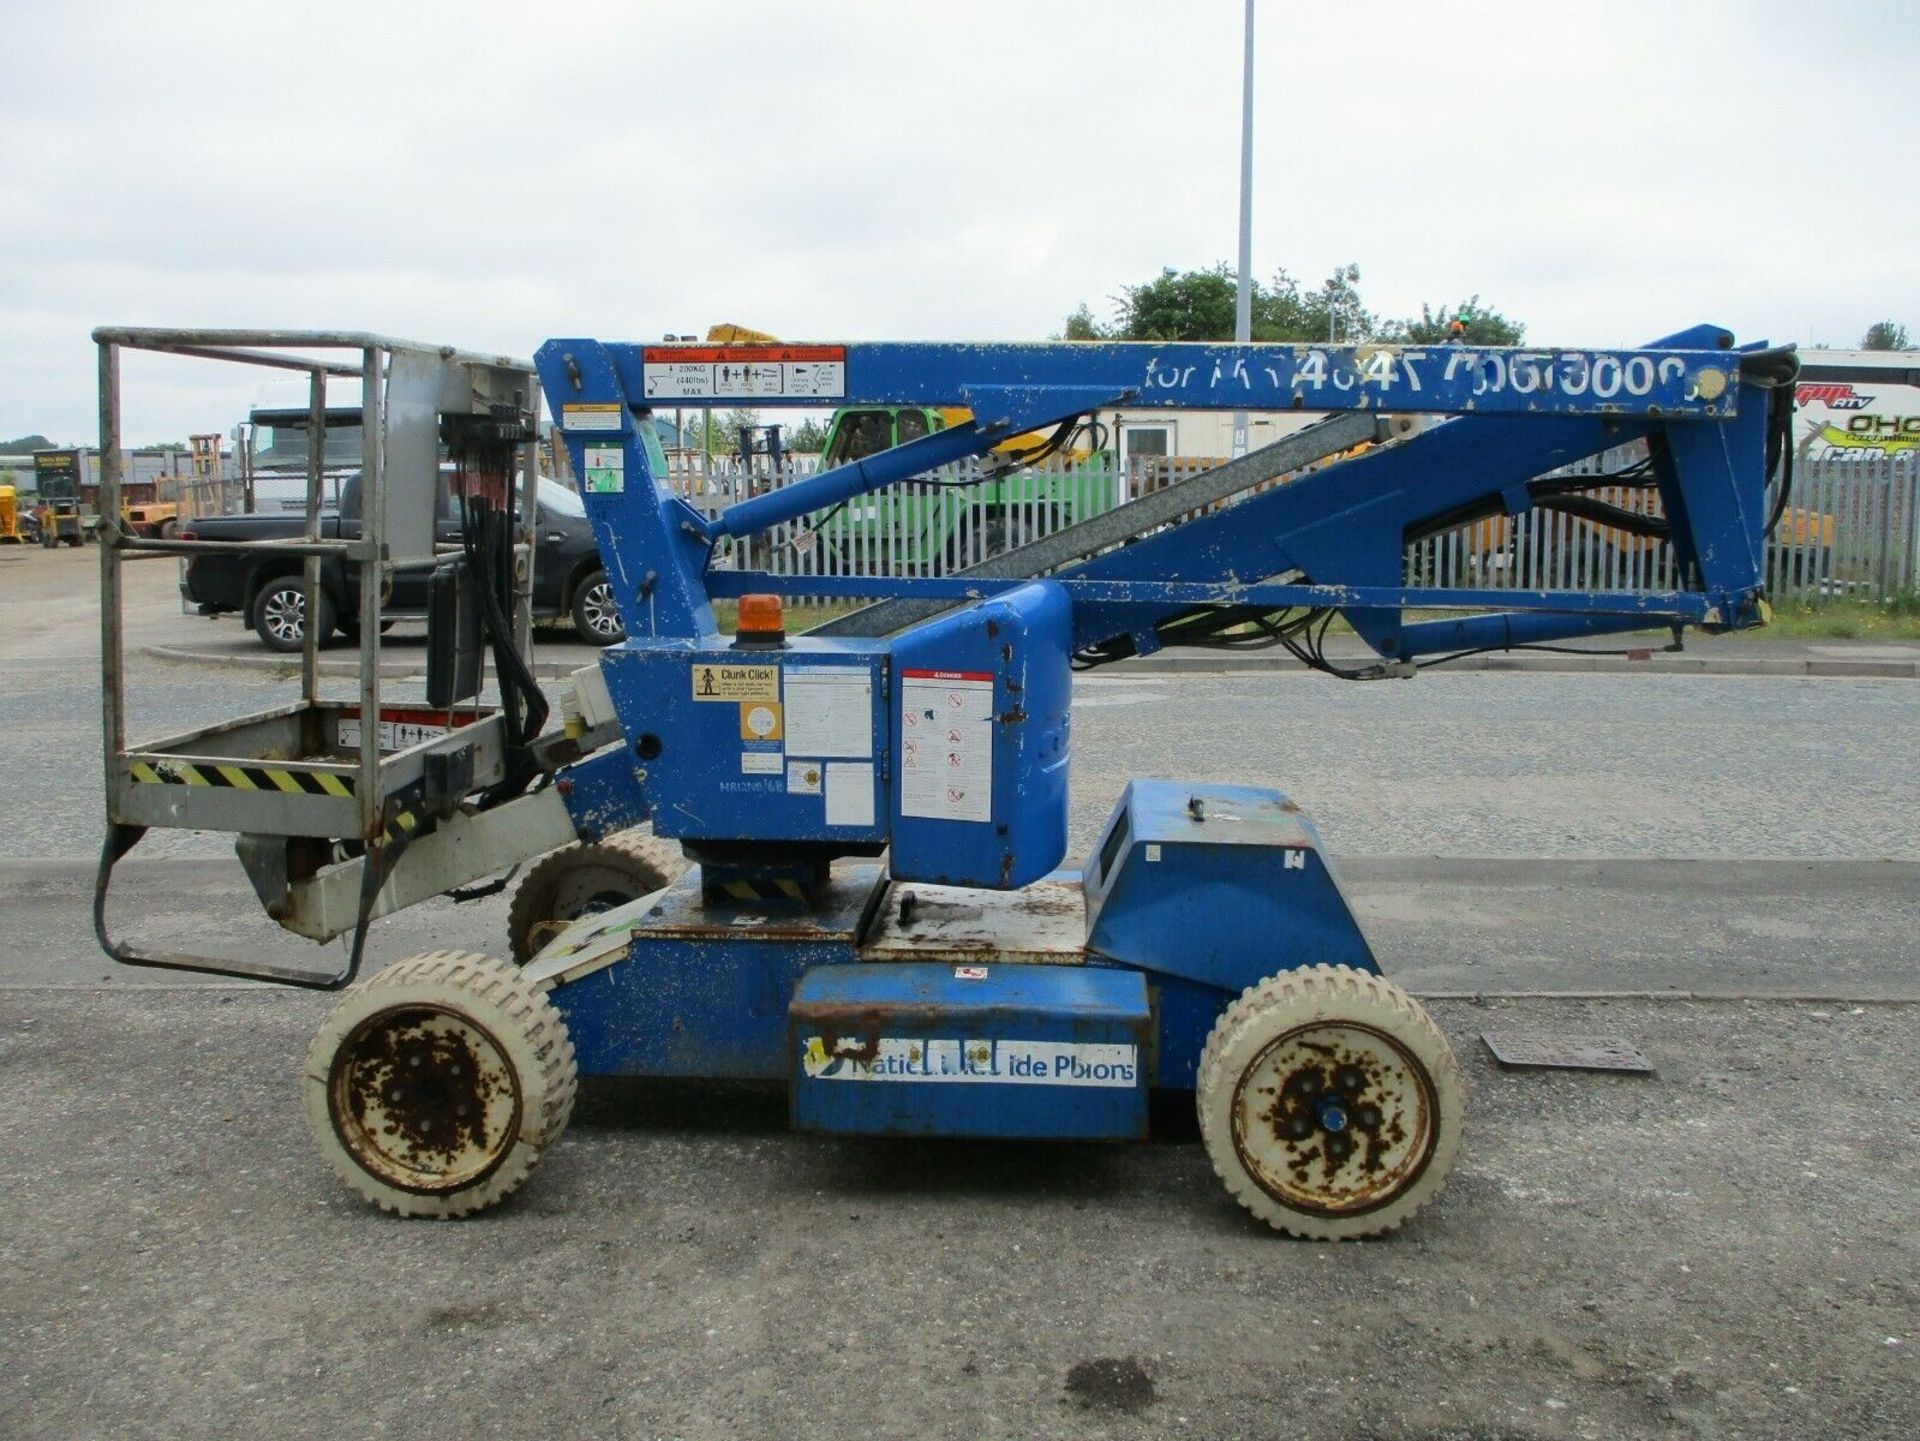 Nifty Lift HR12 Self Propelled Access Platform 2008 - Image 3 of 9